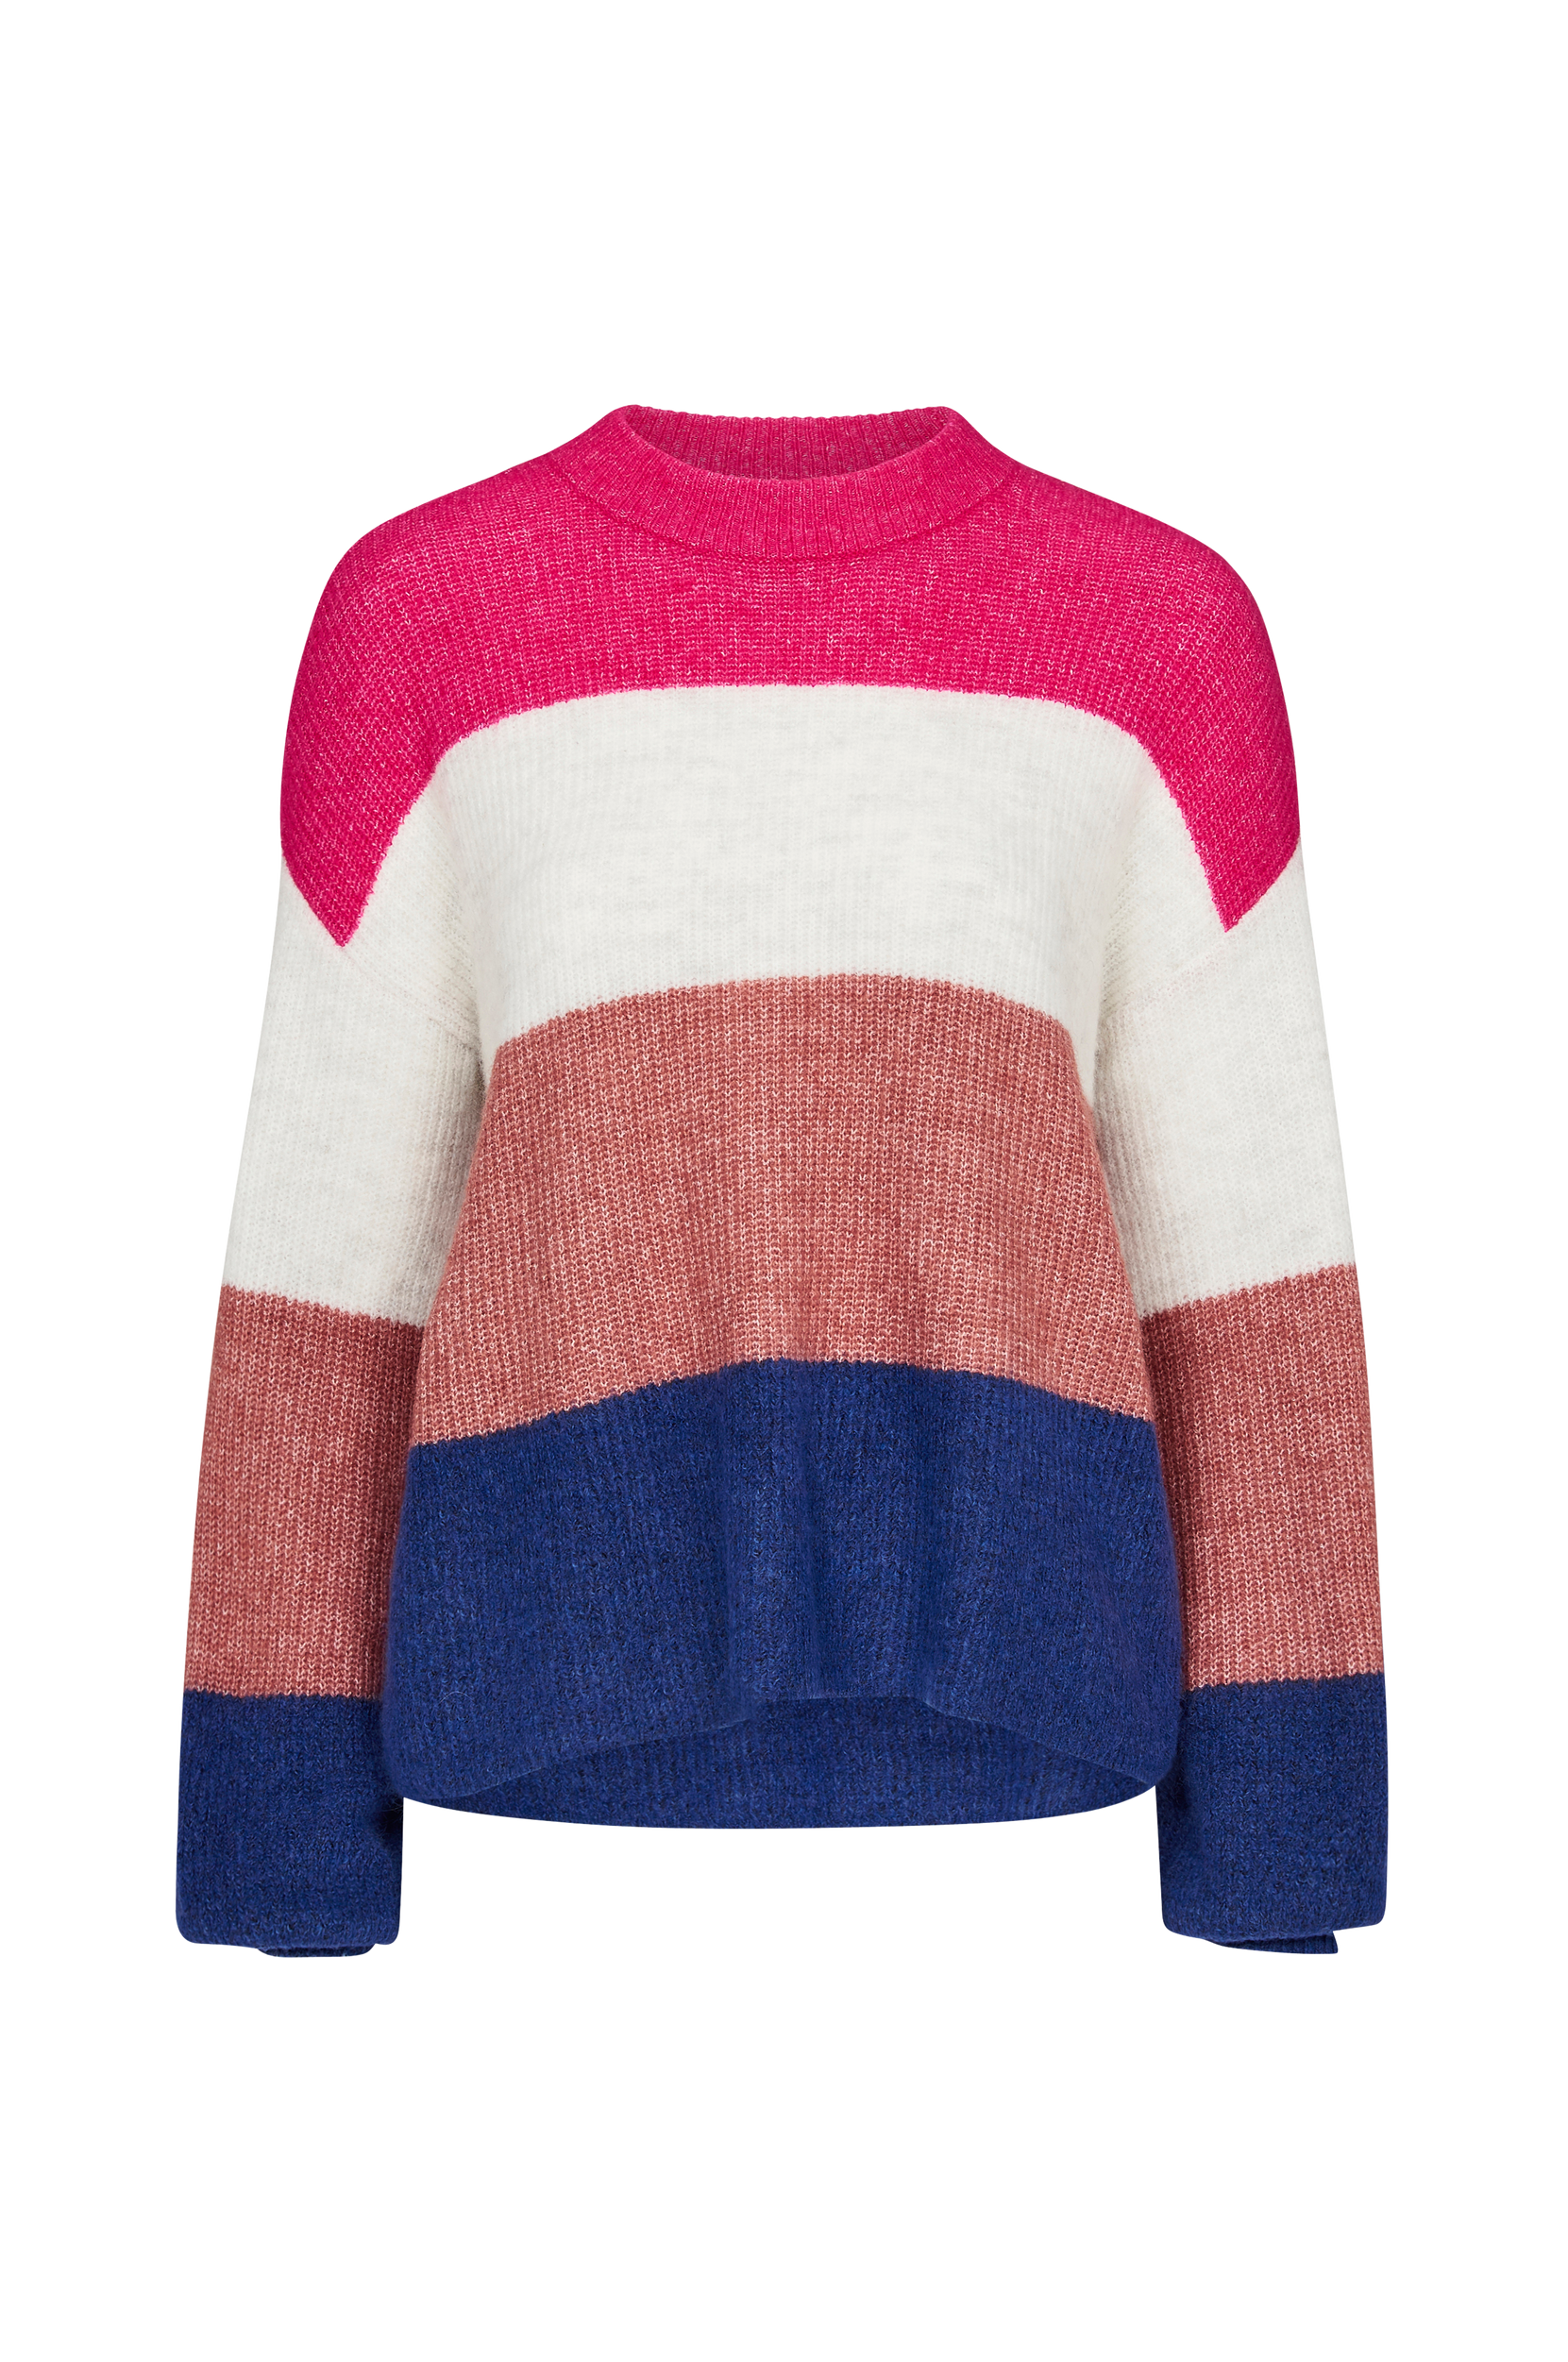 Clock Knit Pullover neulepusero, Y.A.S